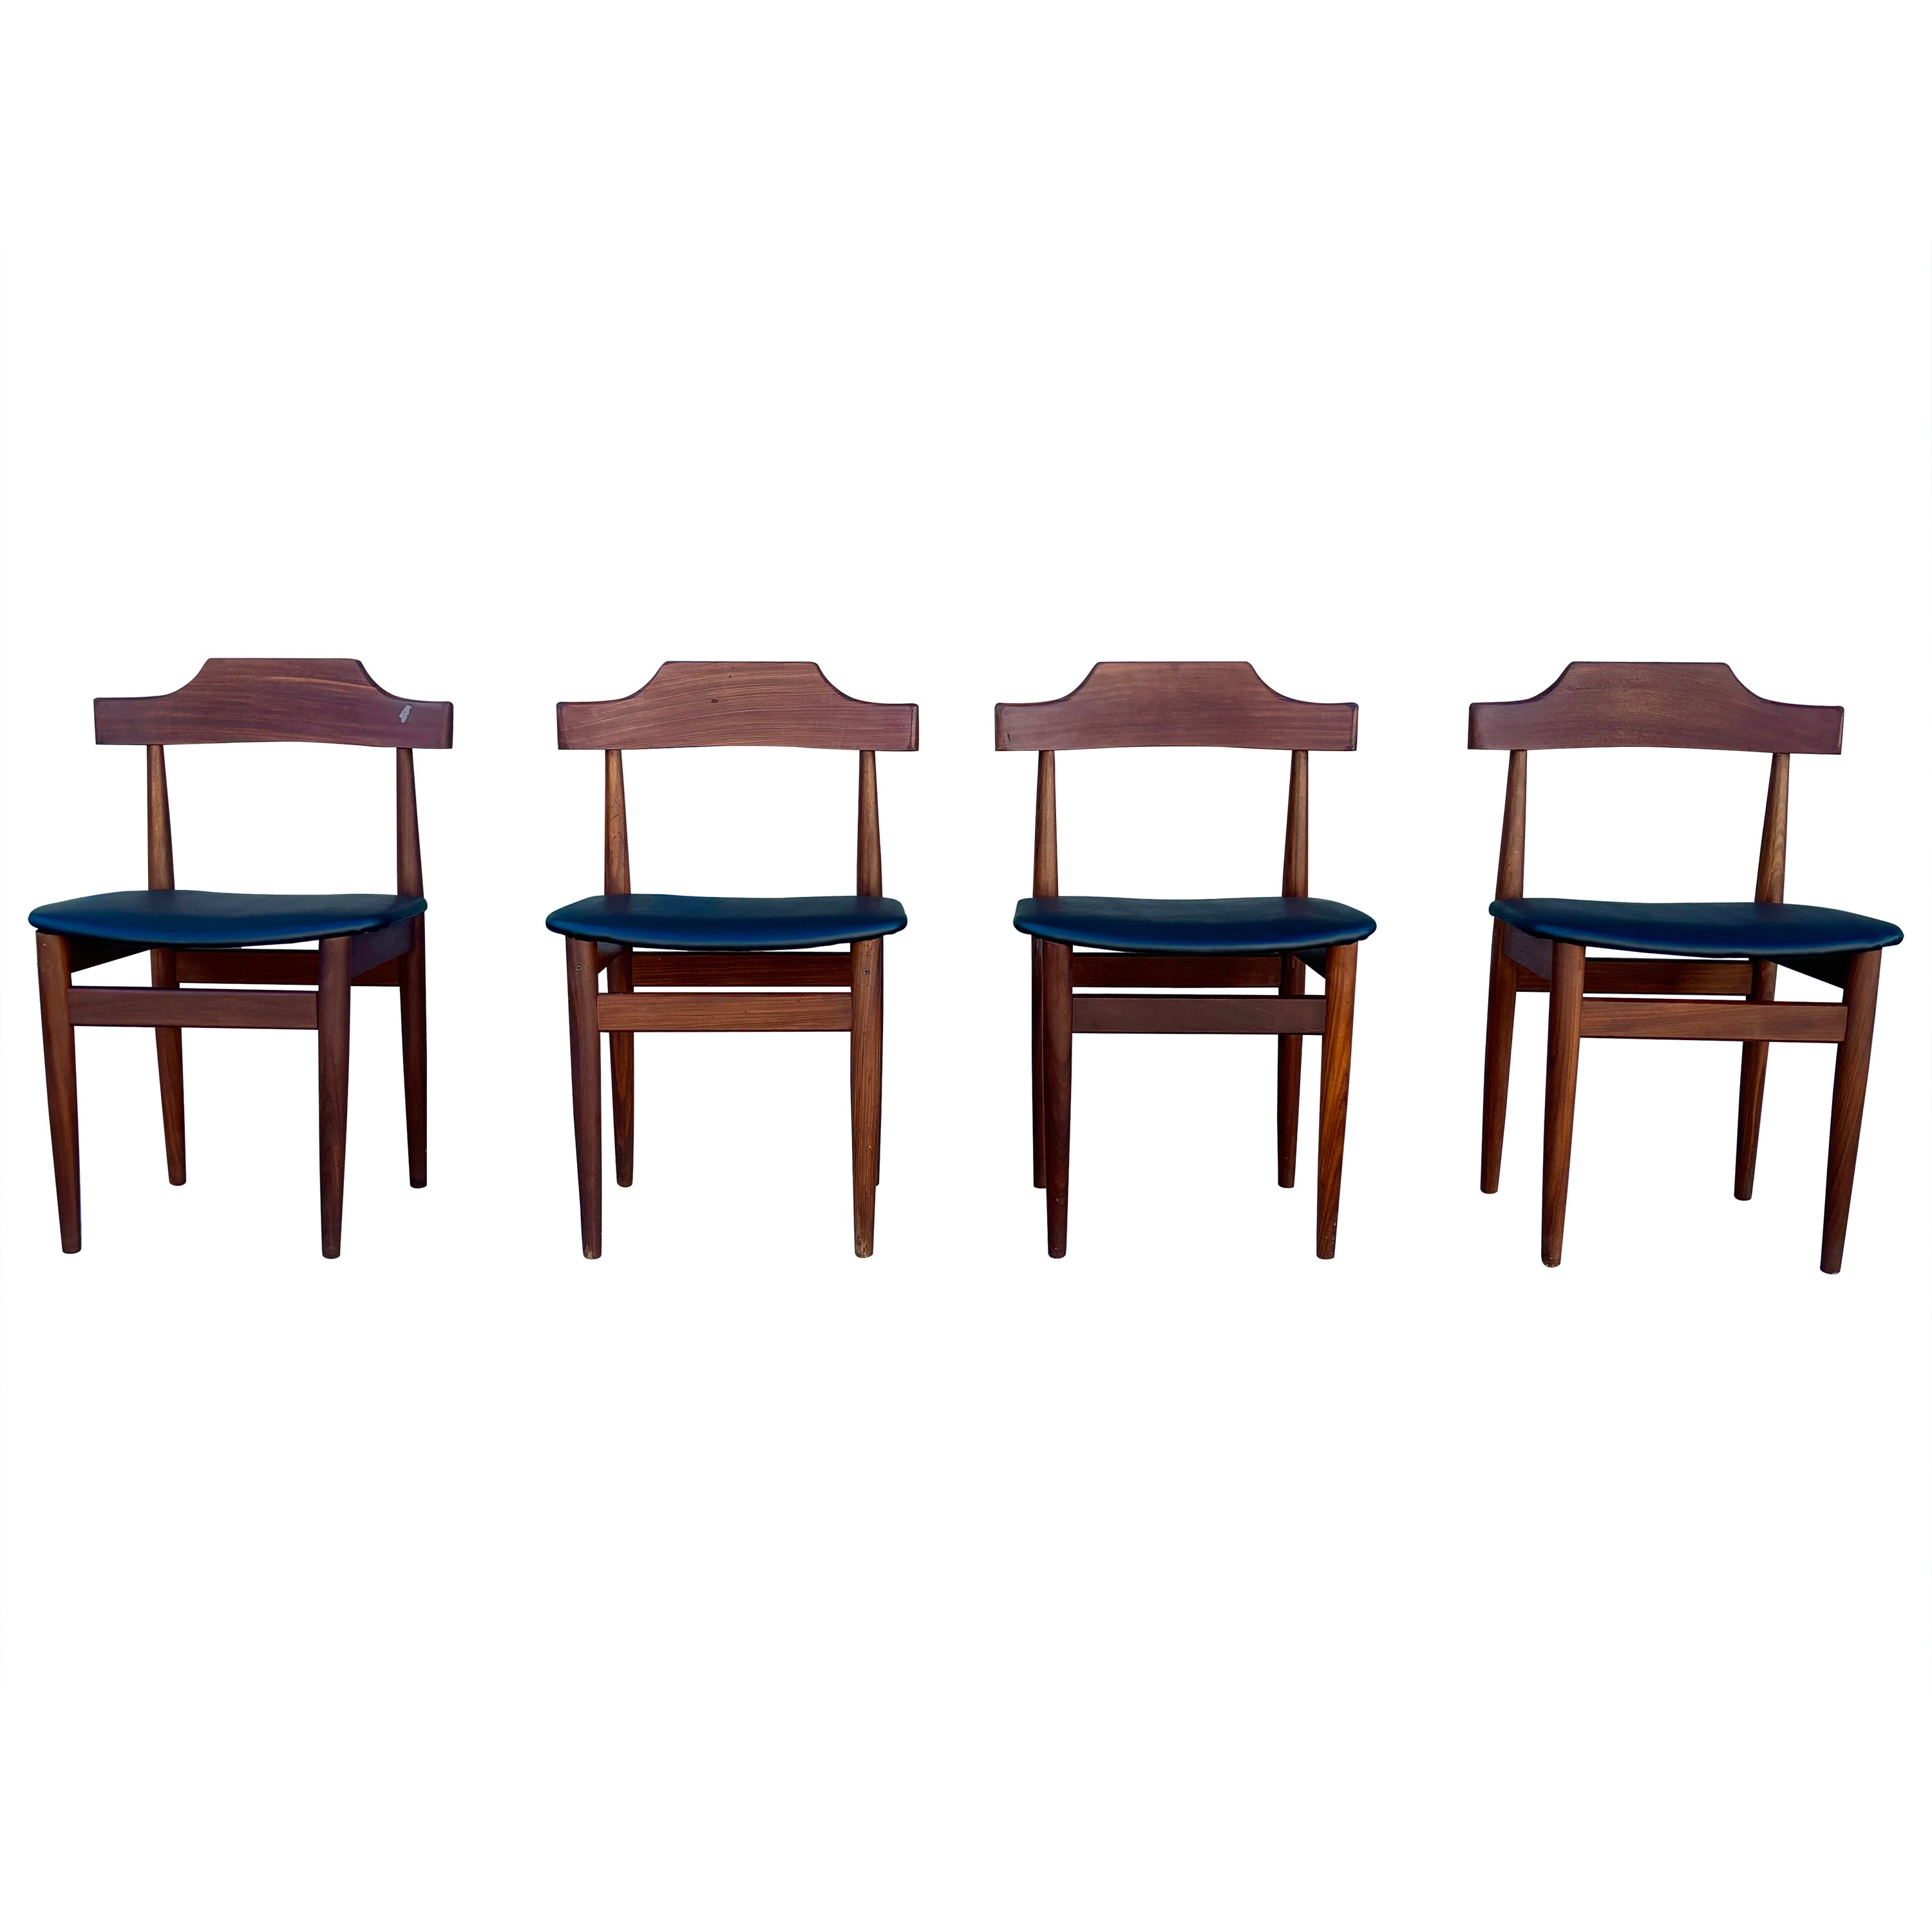 Frem Røjle Dining Room Chairs